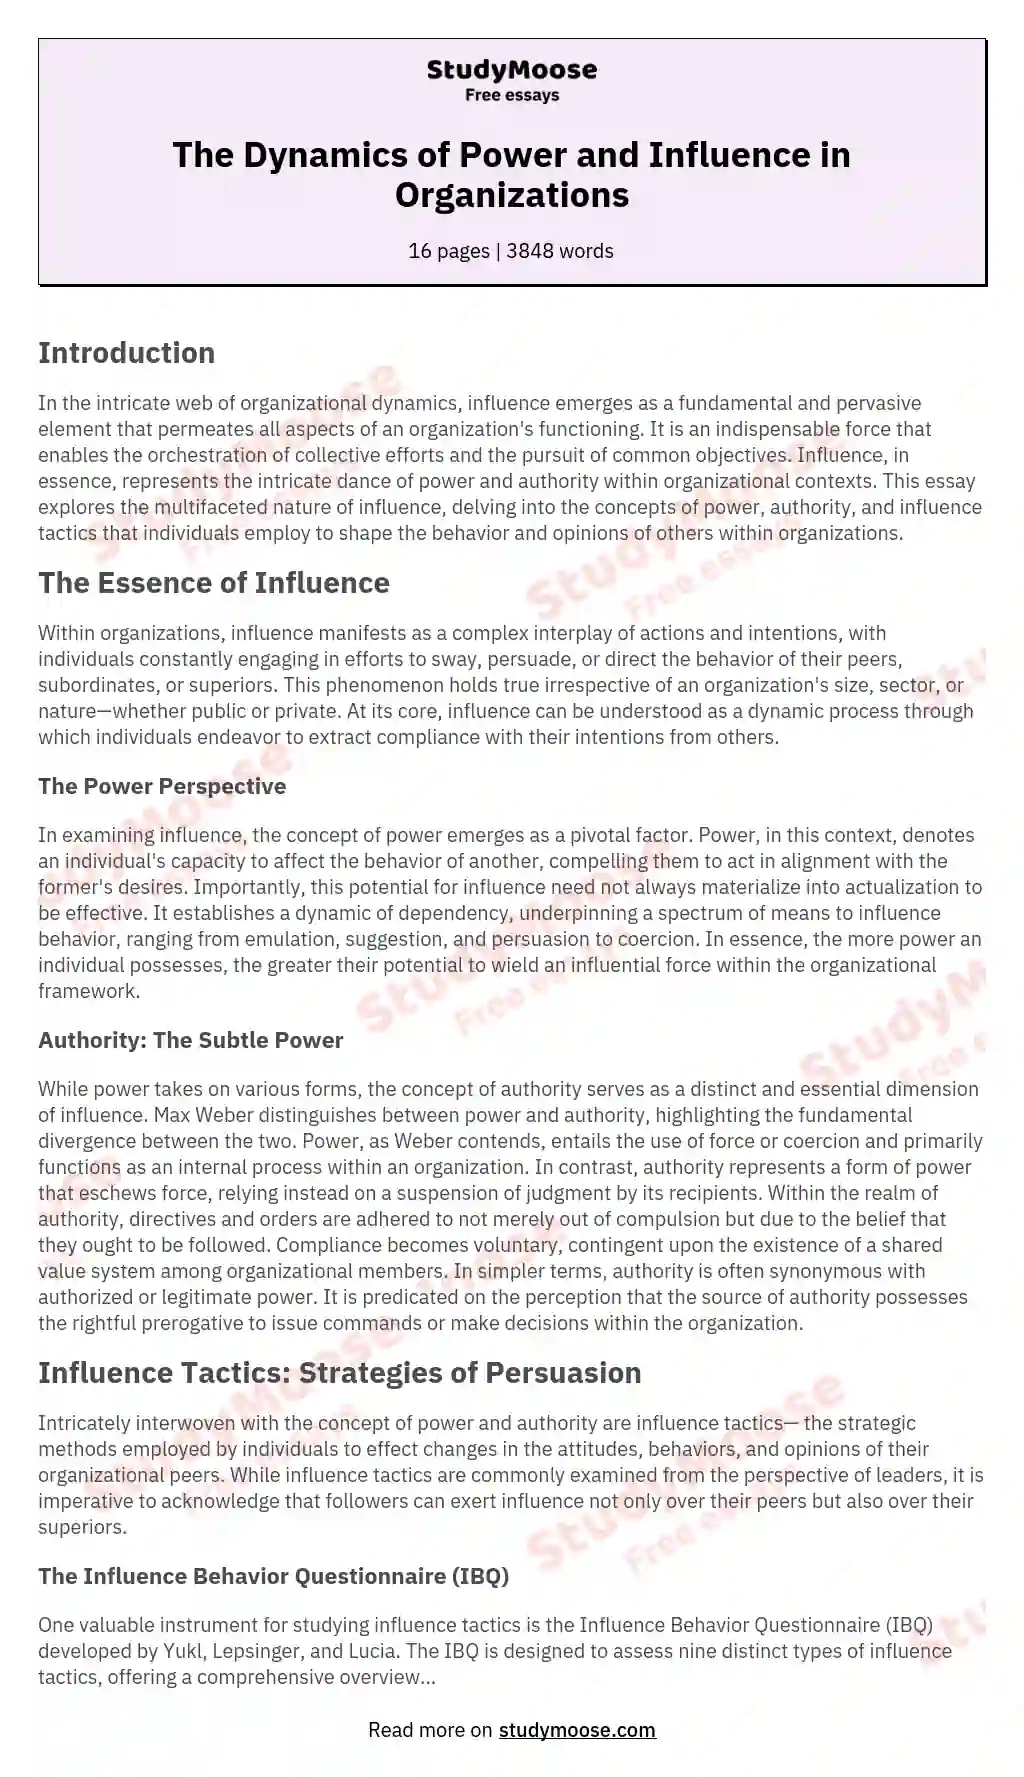 The Dynamics of Power and Influence in Organizations essay